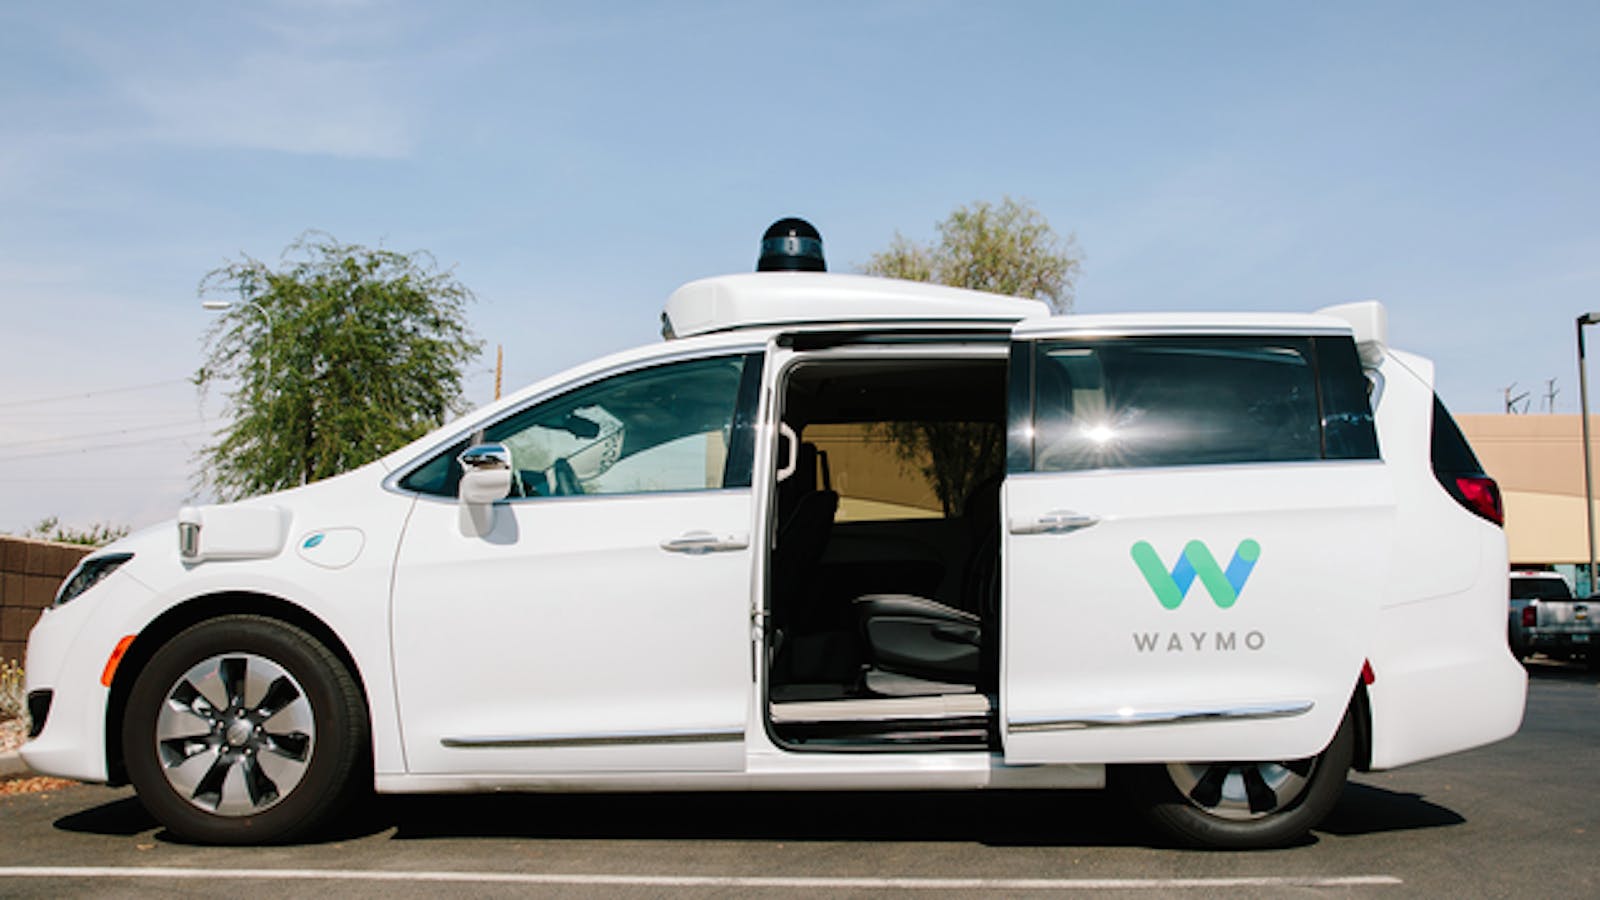 A Waymo vehicle sits parked in Chandler, Ariz. Photo: Bloomberg